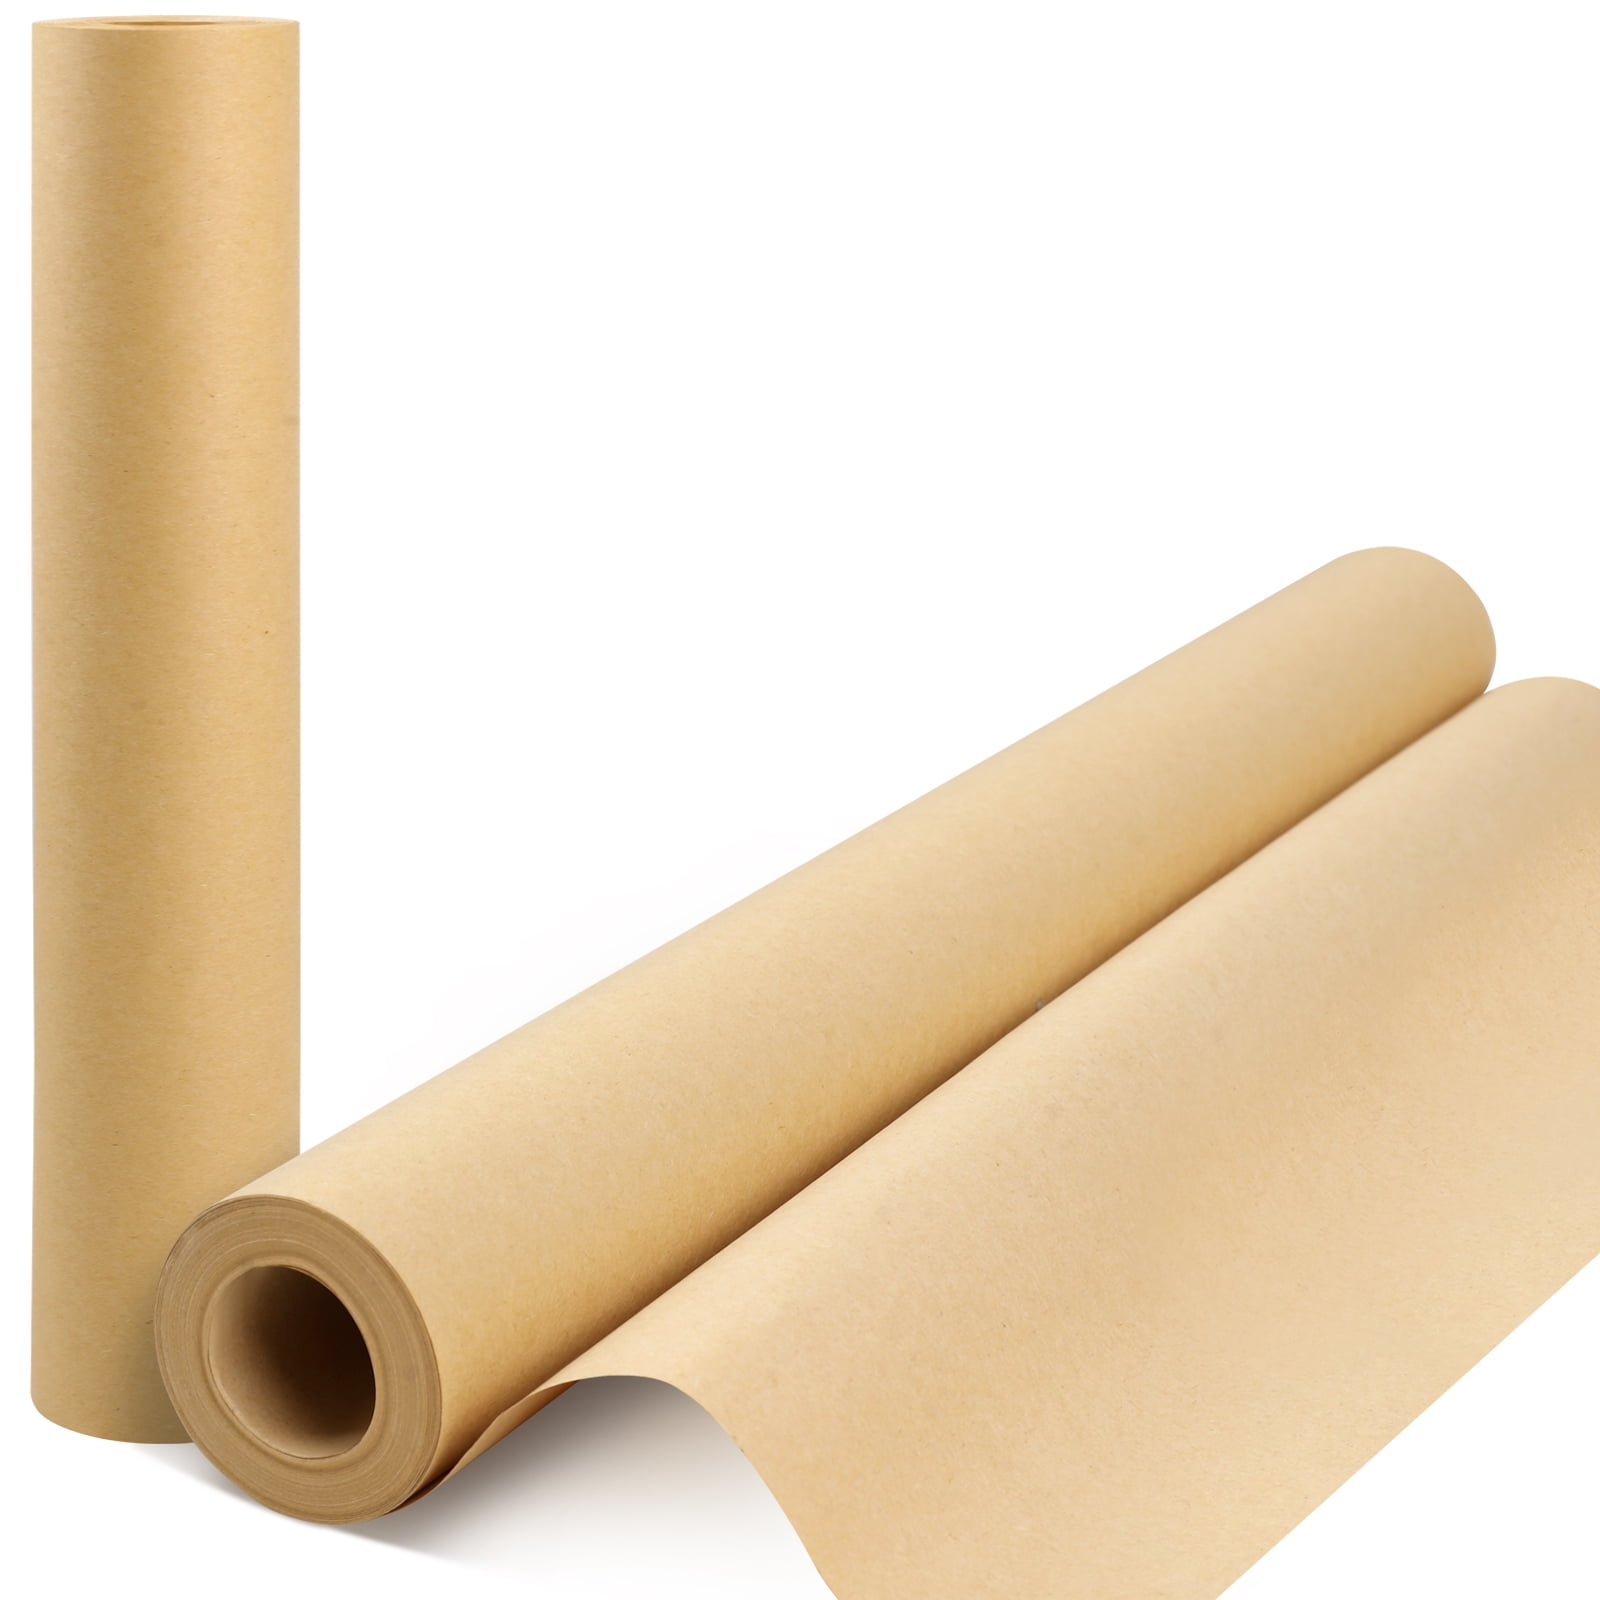 2 Pack Brown Paper Roll 15×800, Brown Wrapping Paper, Wrapping Paper,  Craft Paper, Packing Paper for Moving, Packing, Gift Wrapping, Wall Art,  Table